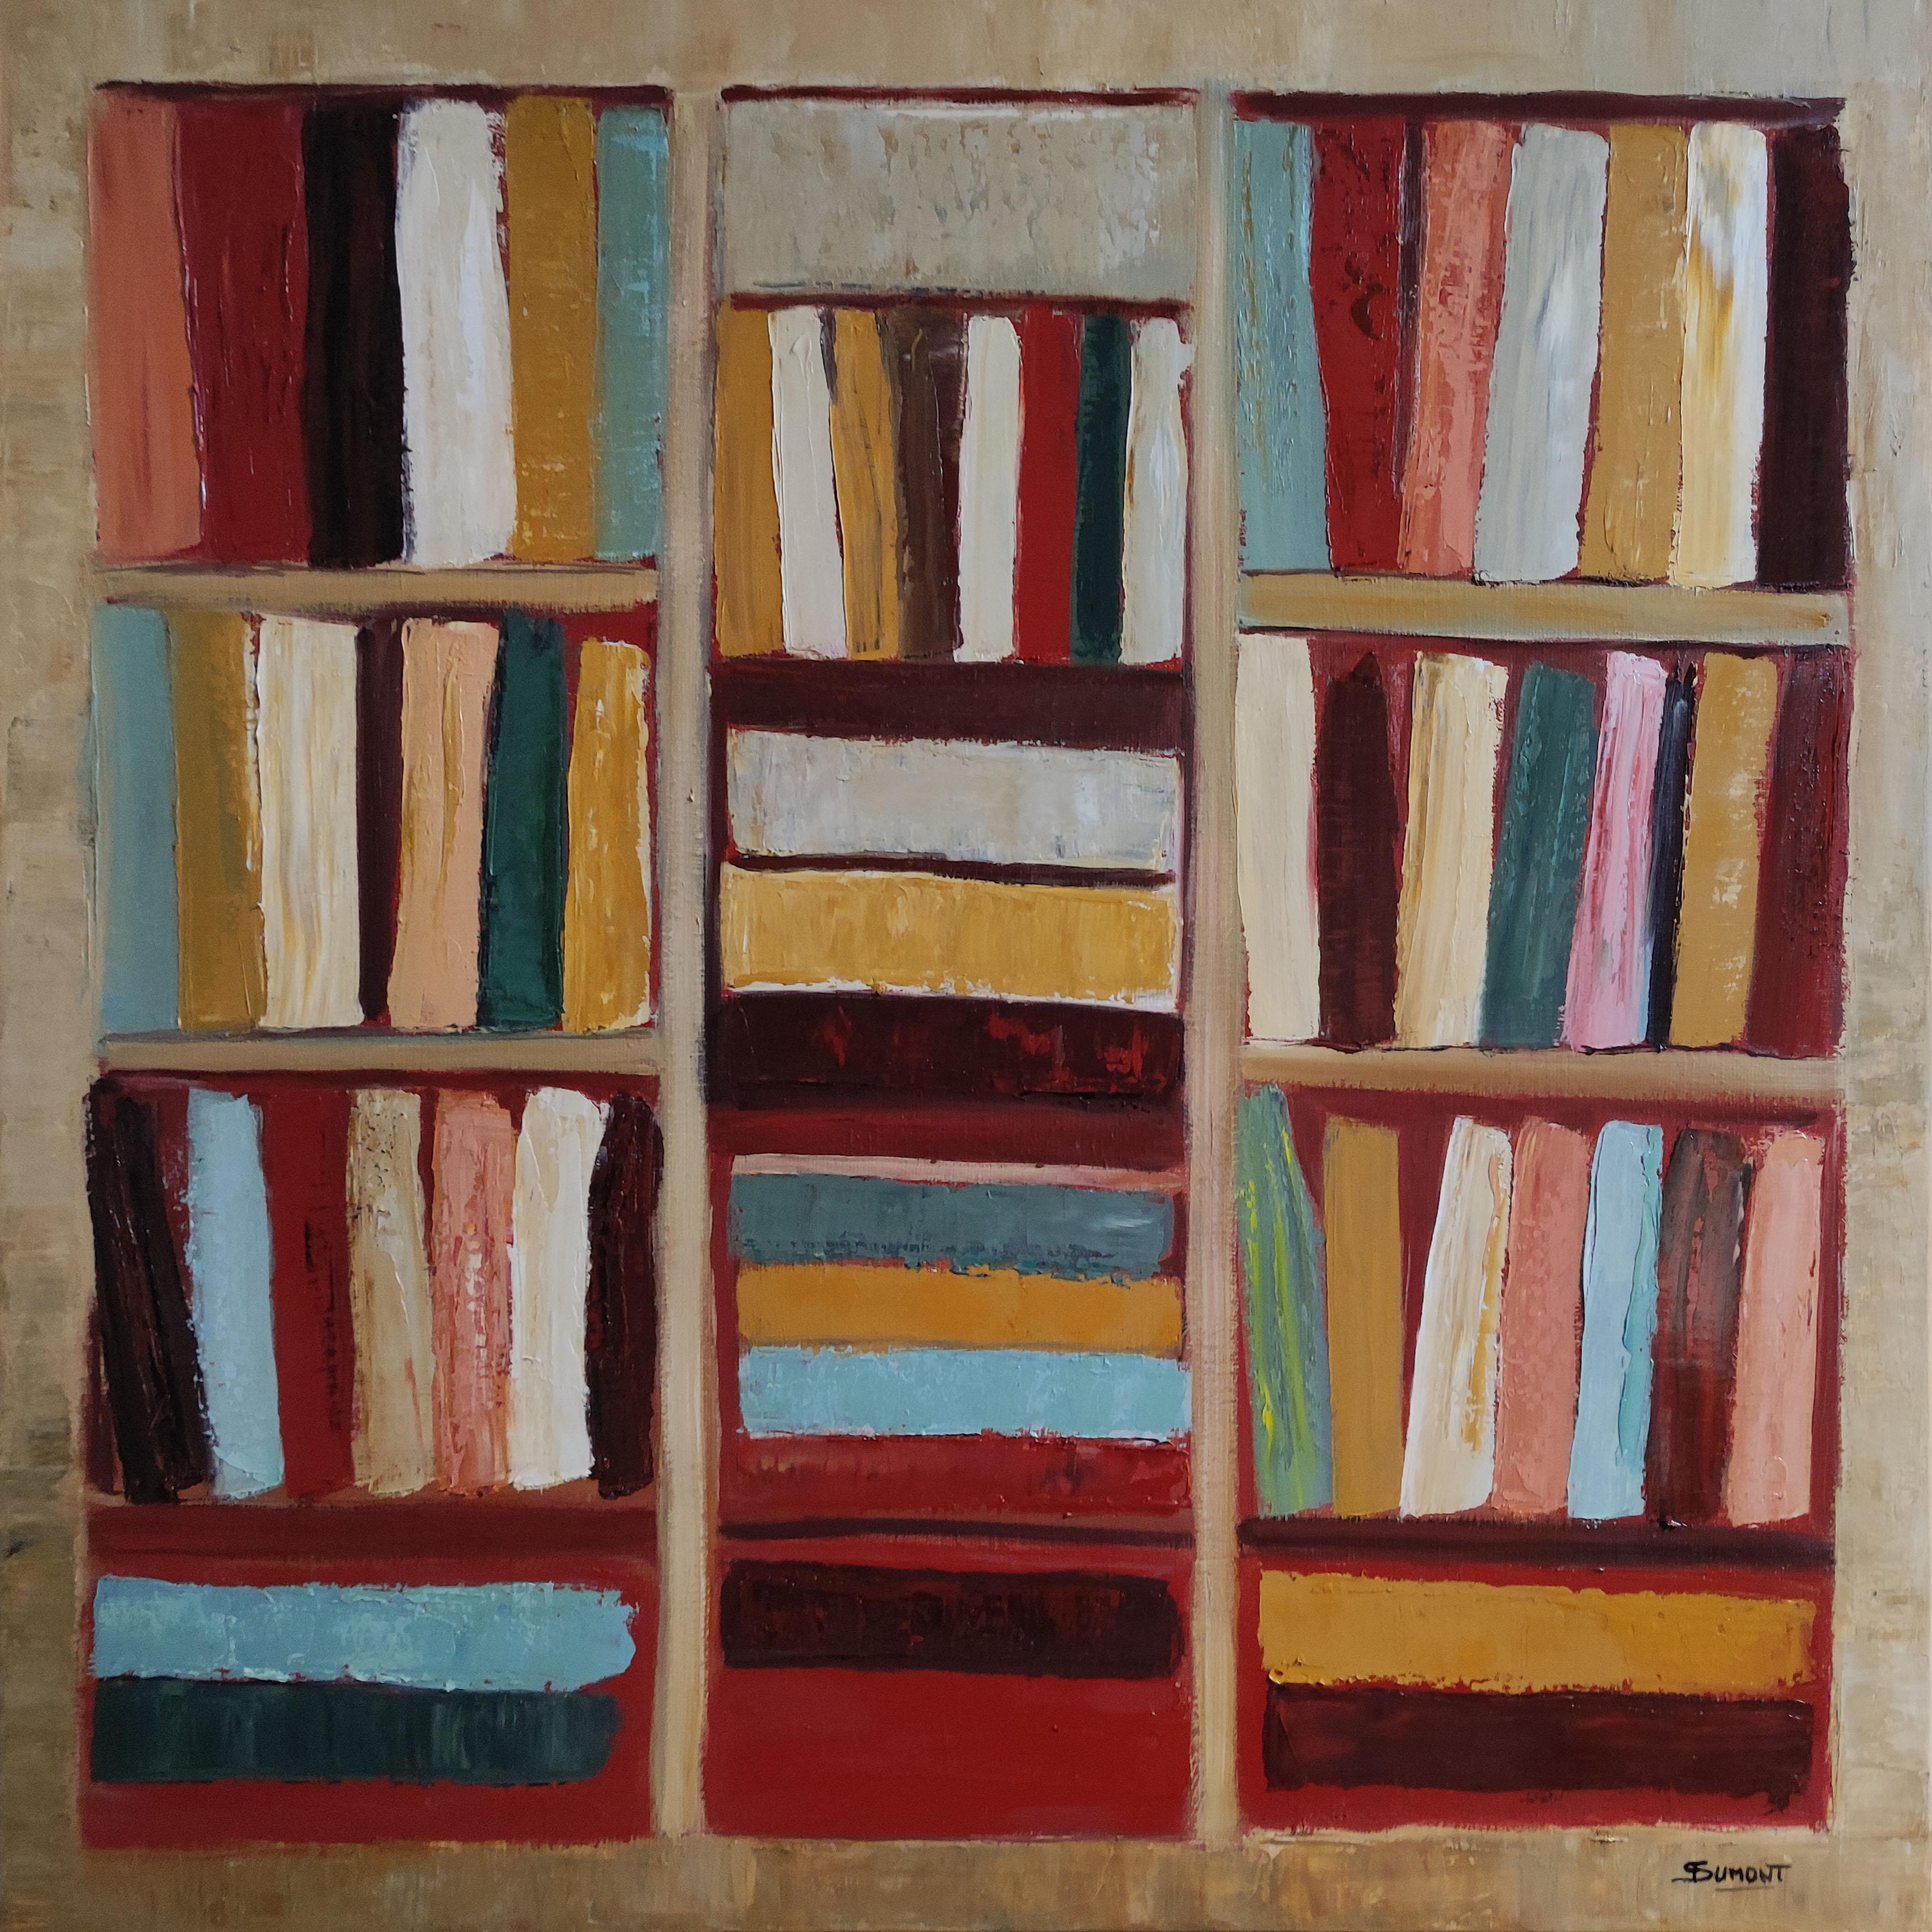 SOPHIE DUMONT Abstract Painting - tales, abstract geometric still life, books, library, oil on canvas, modern